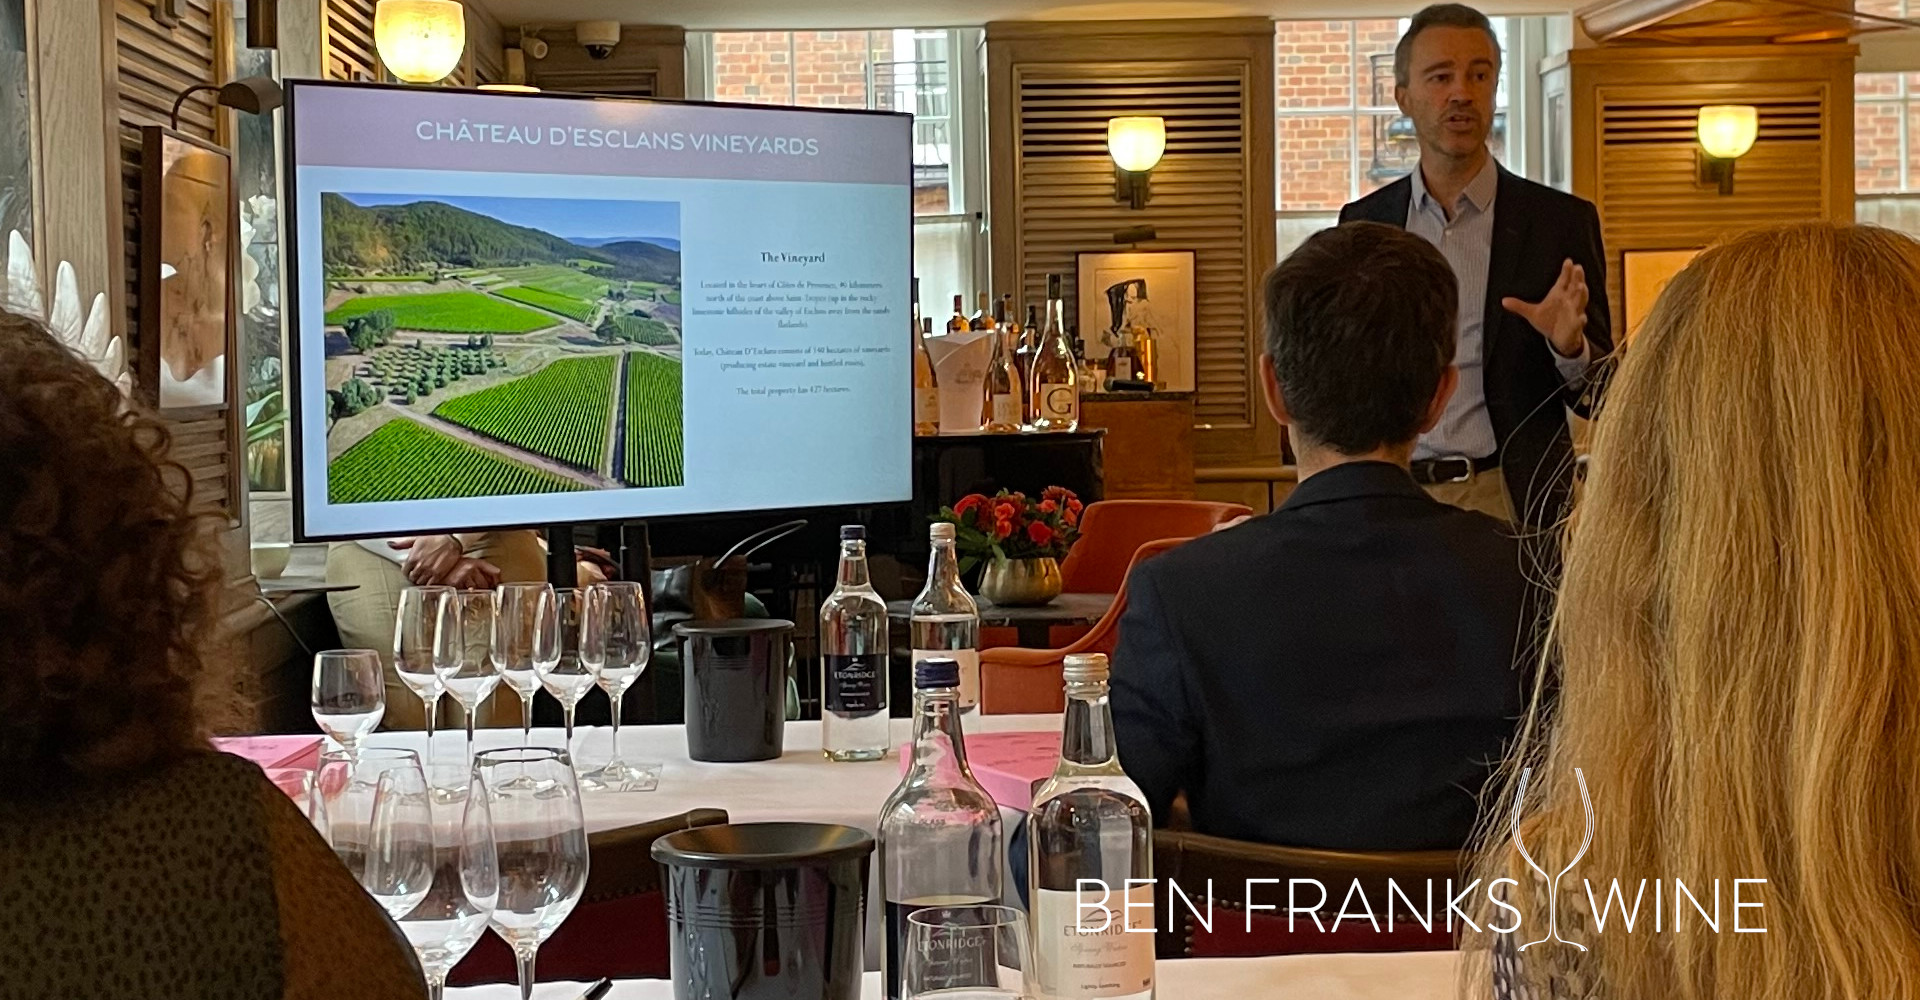 Bertrand Léon leads a tasting of rosé wines for the 2021 vintage.